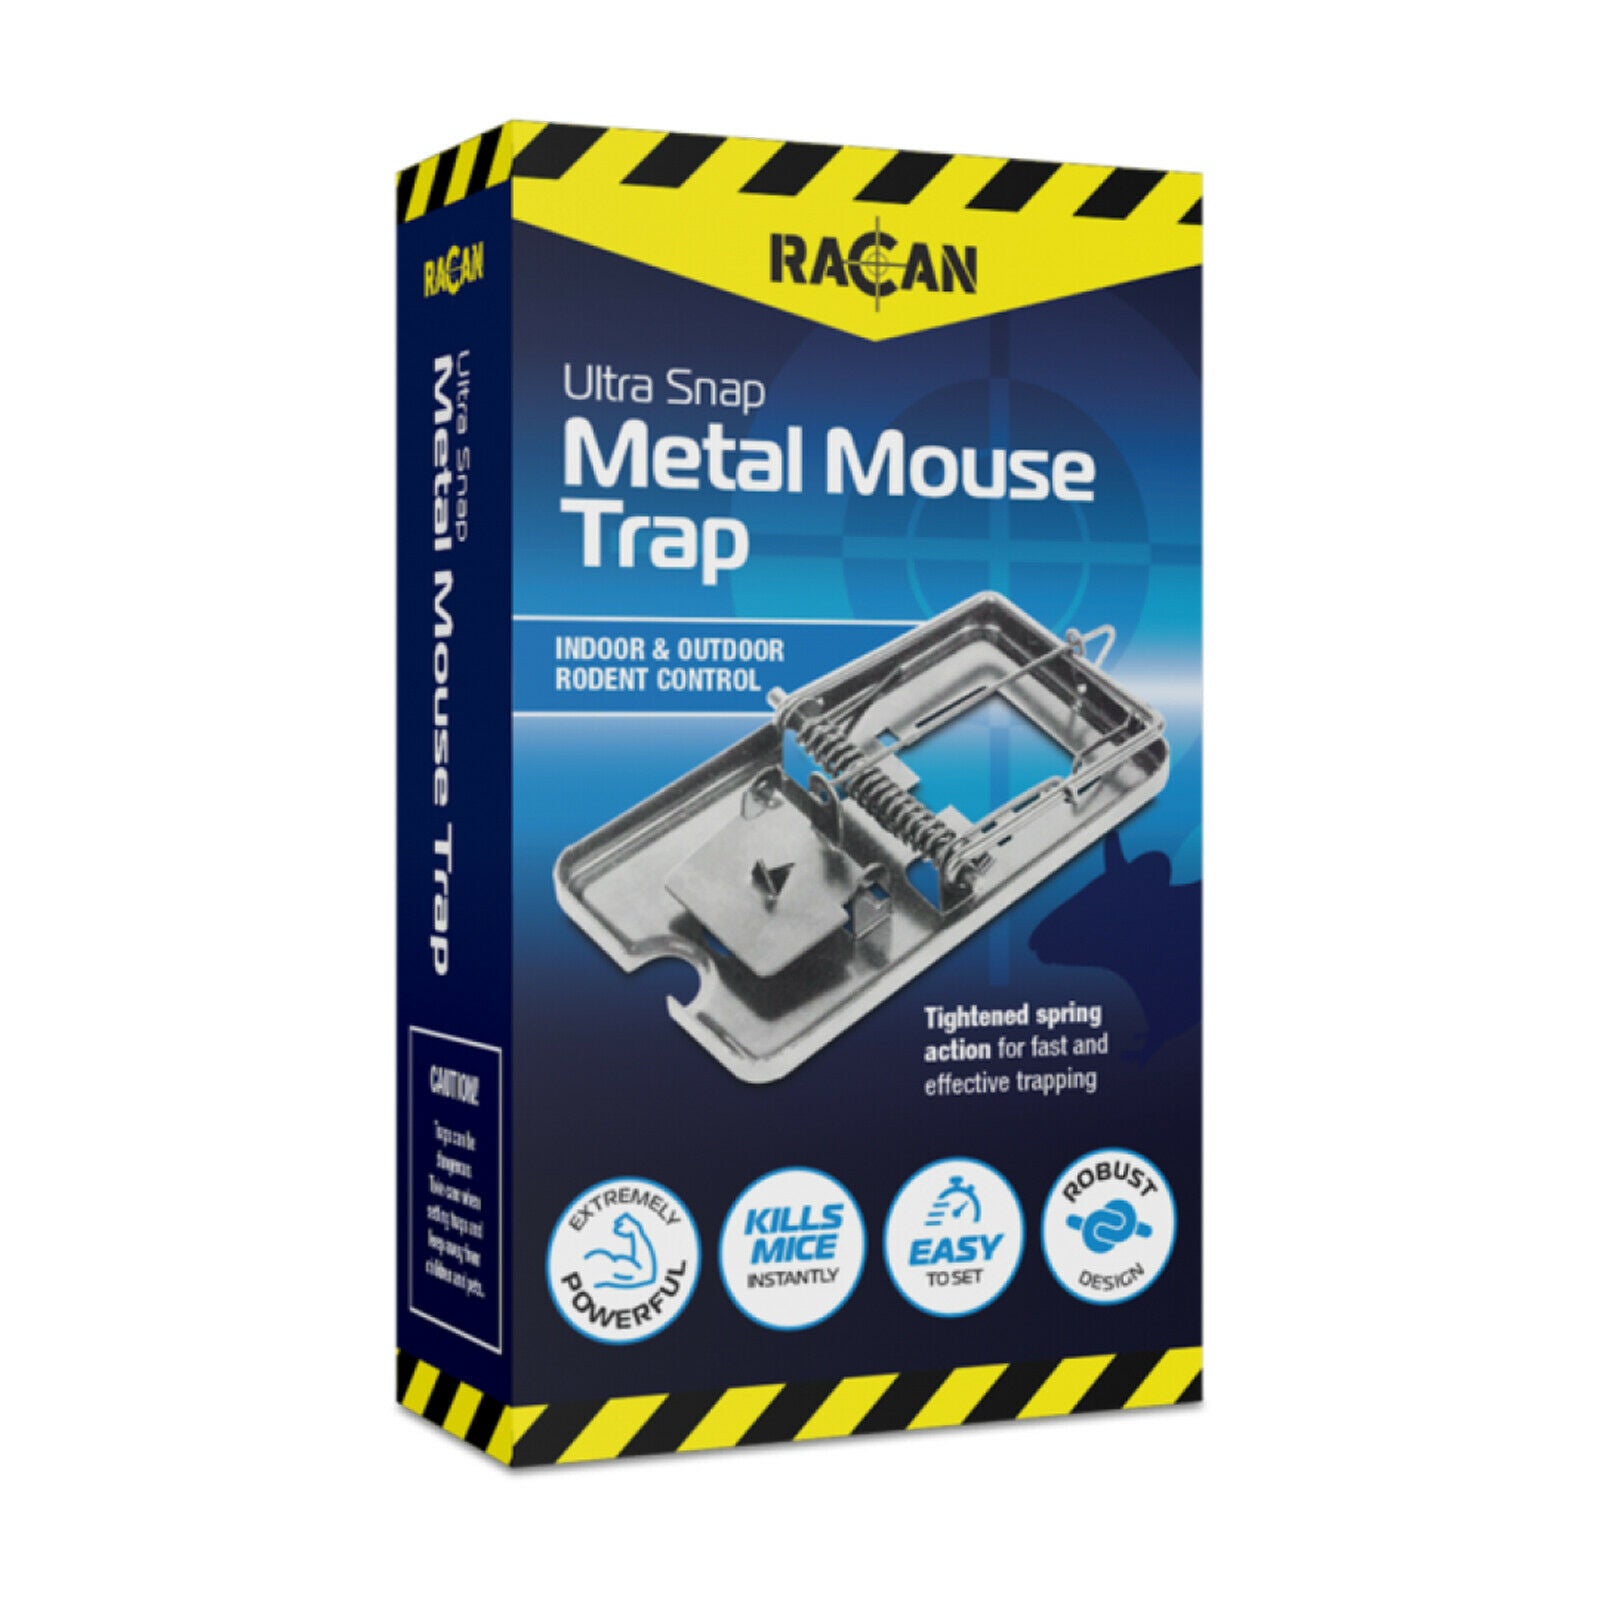 Ultra Snap Metal Mouse Mice Trap Instant Powerful Killer Rodent Control - Moth Control